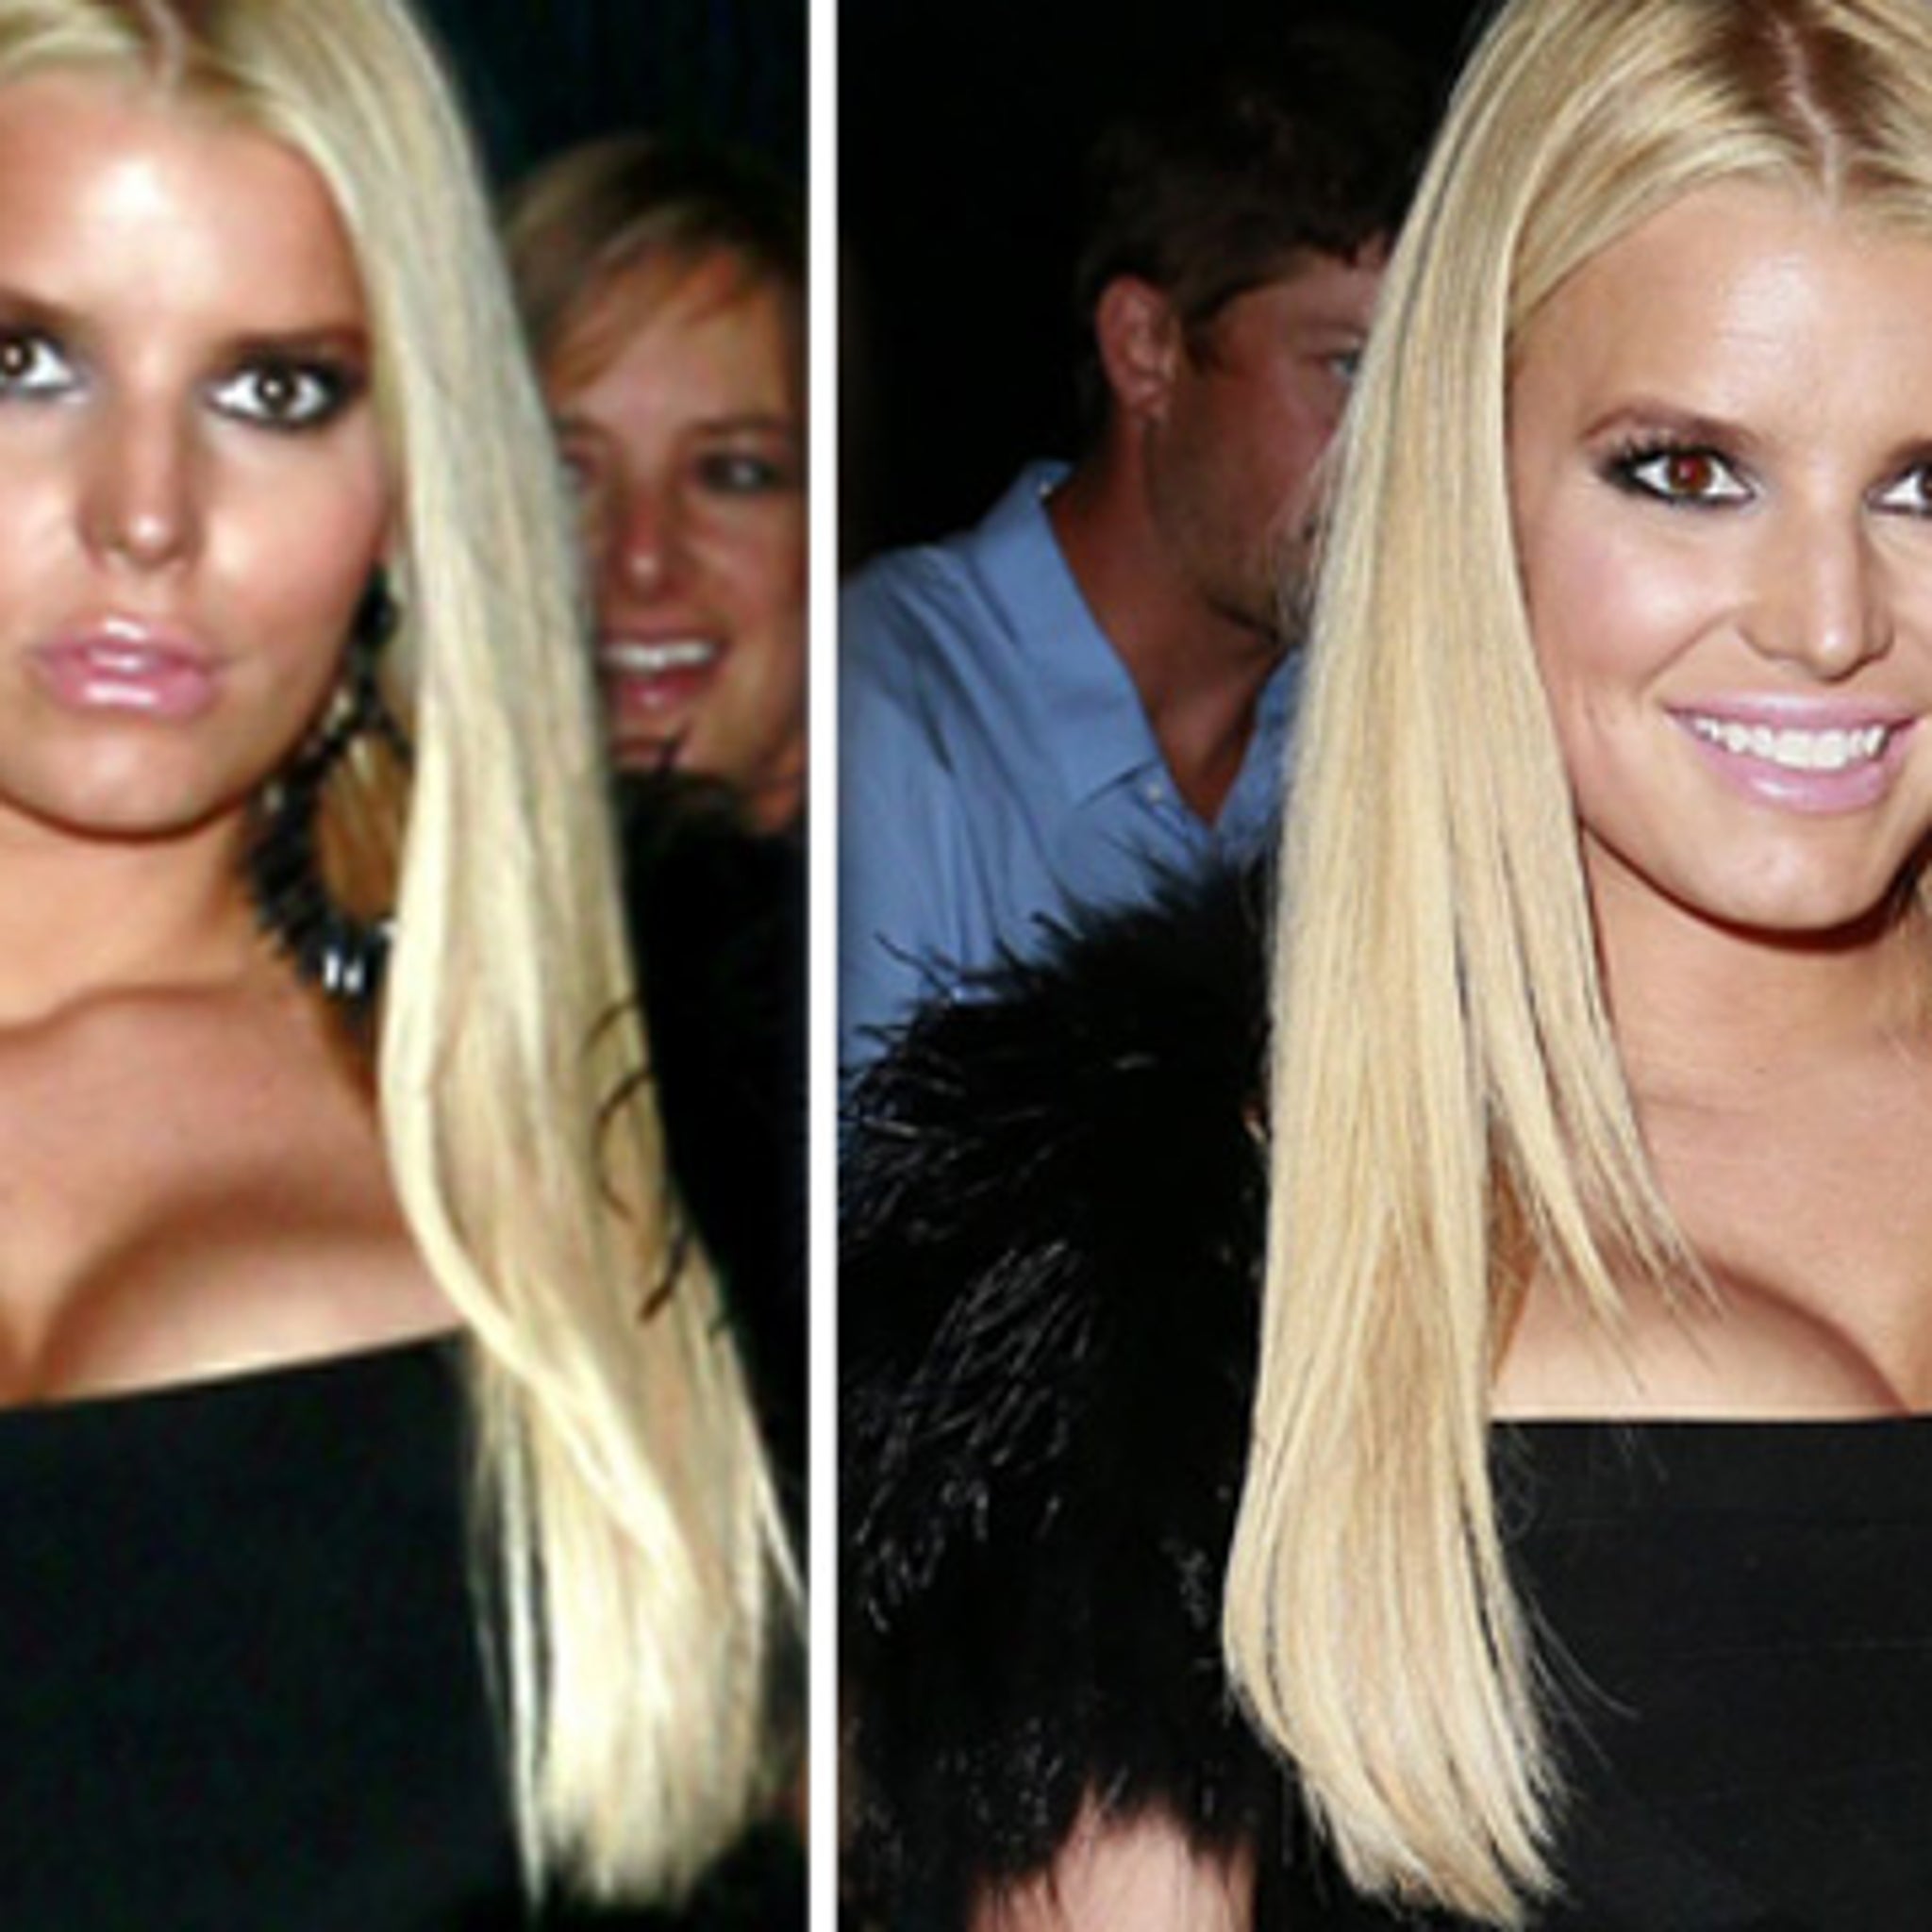 Jessica Simpson Gets Soused!